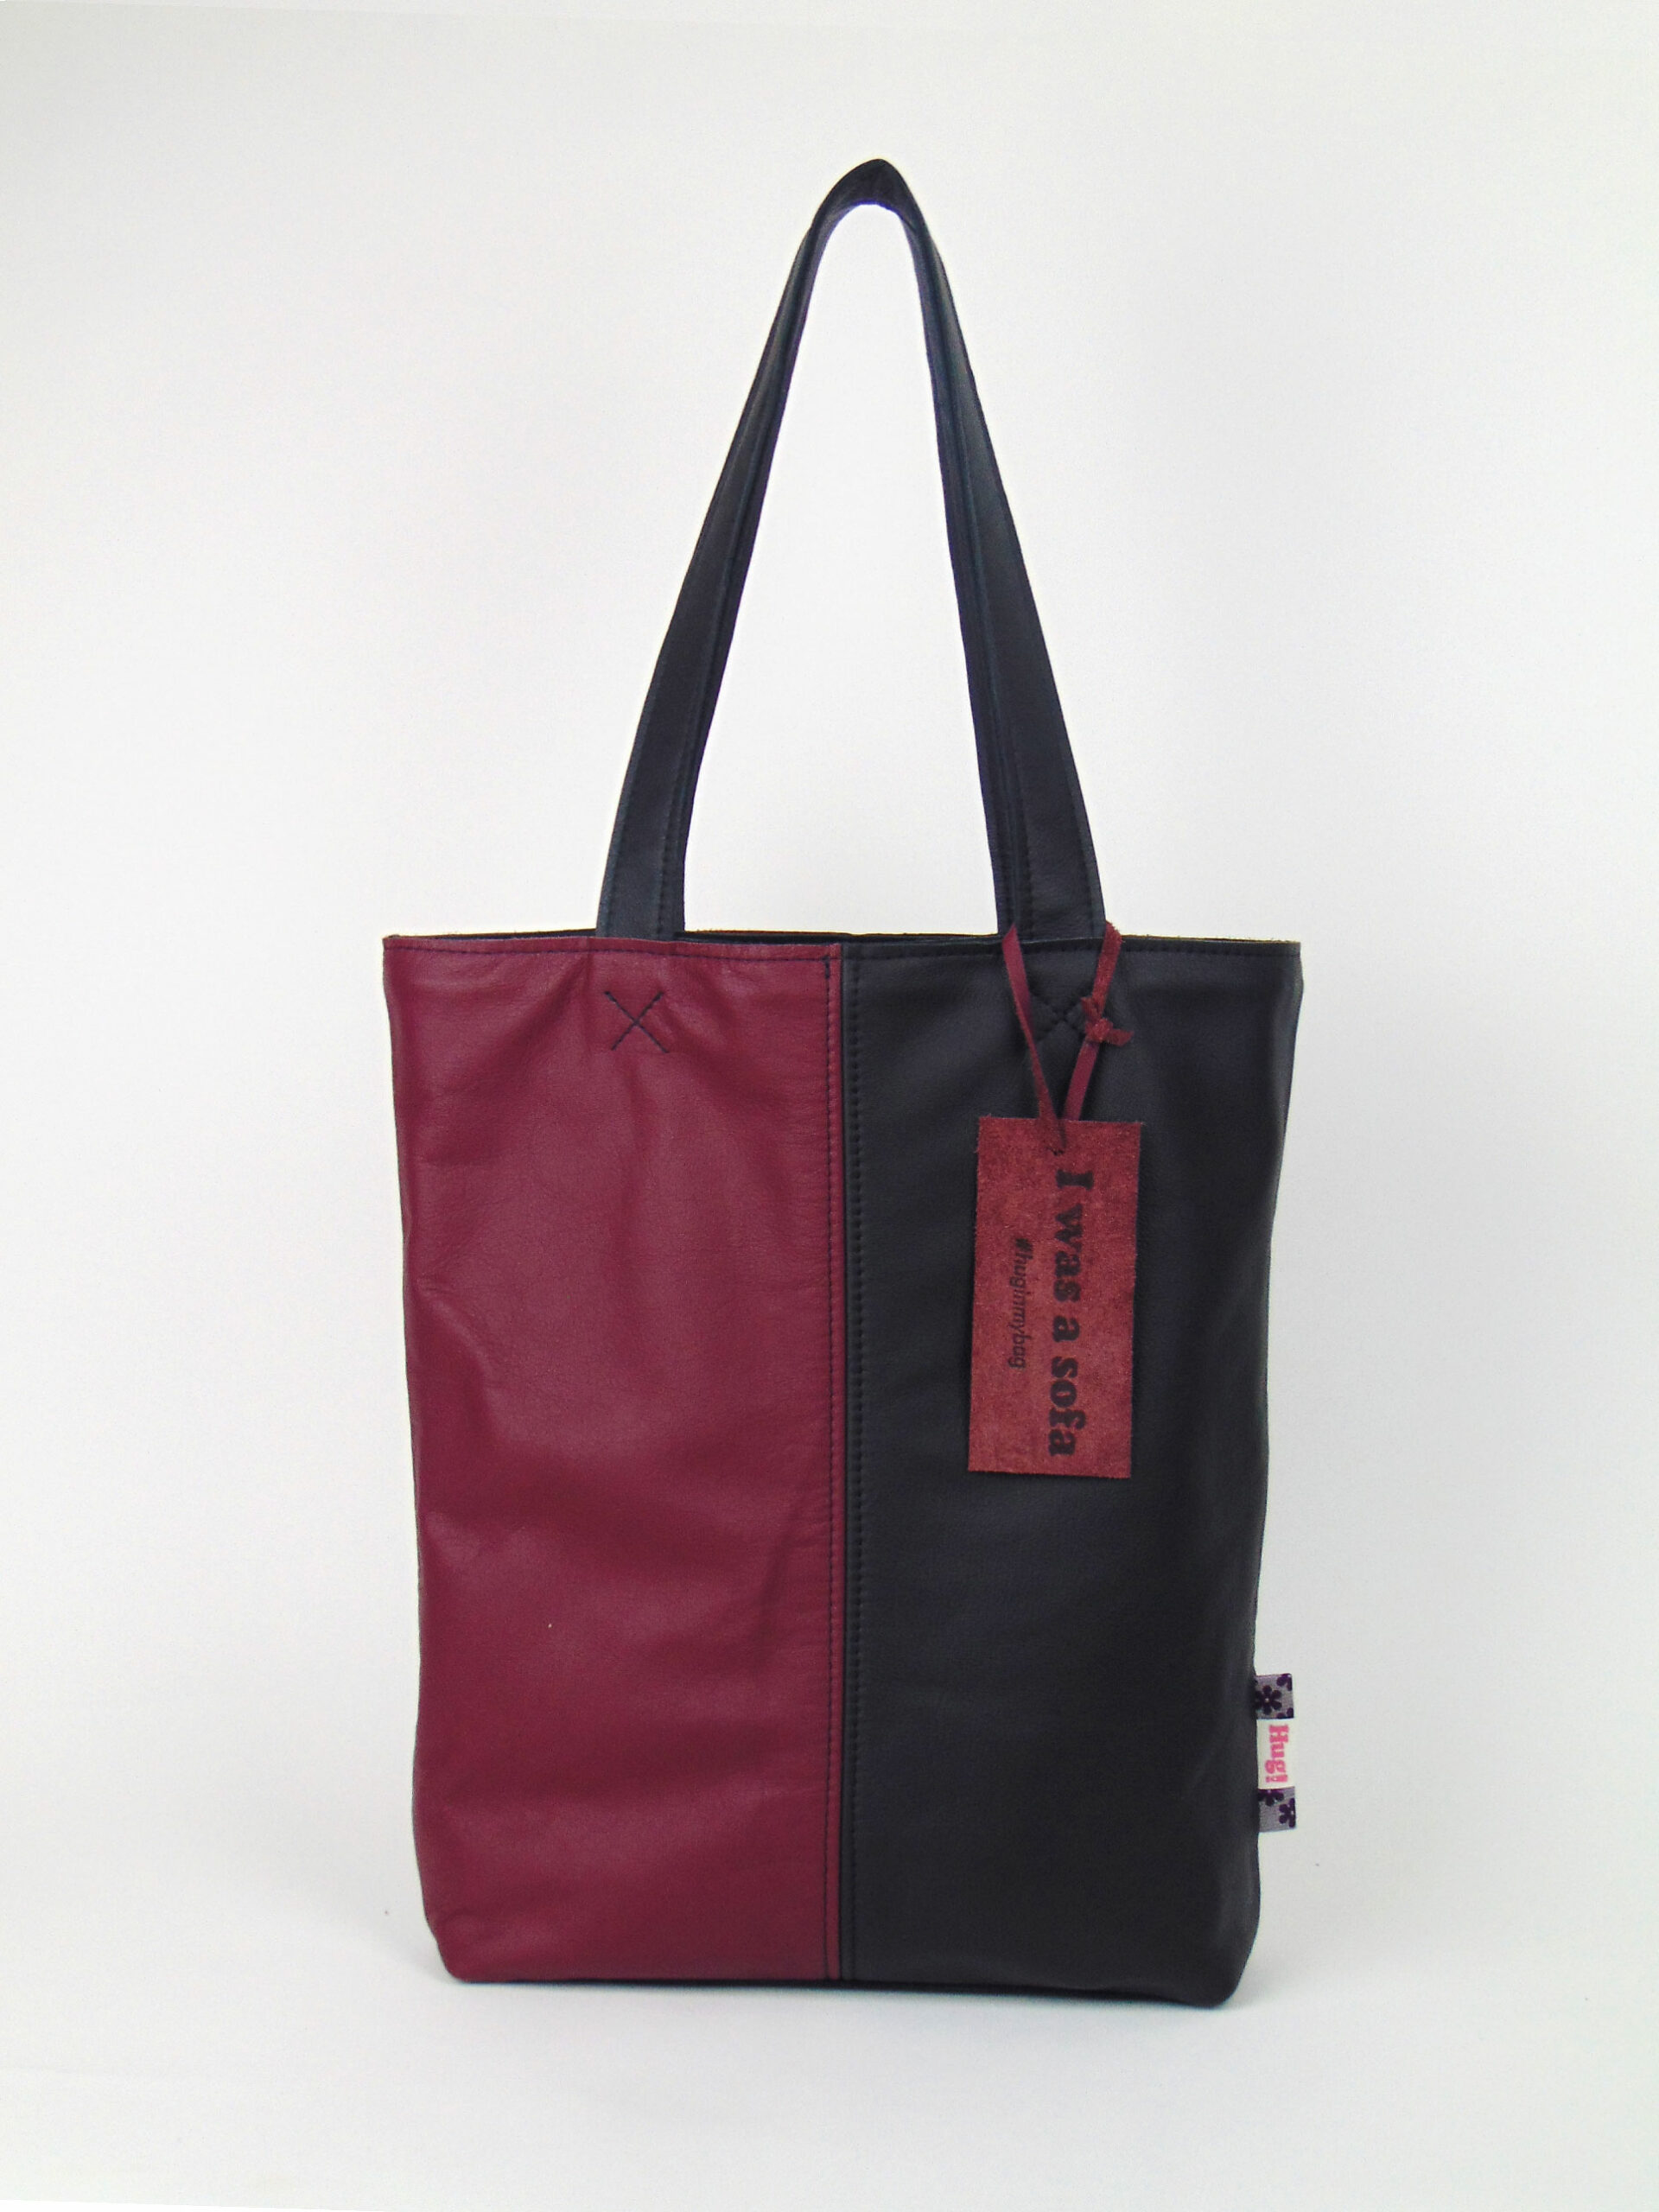 Product image of the shopper named Bubble Gum. This shopper is made from recycled leather in a colour combination of black and red.